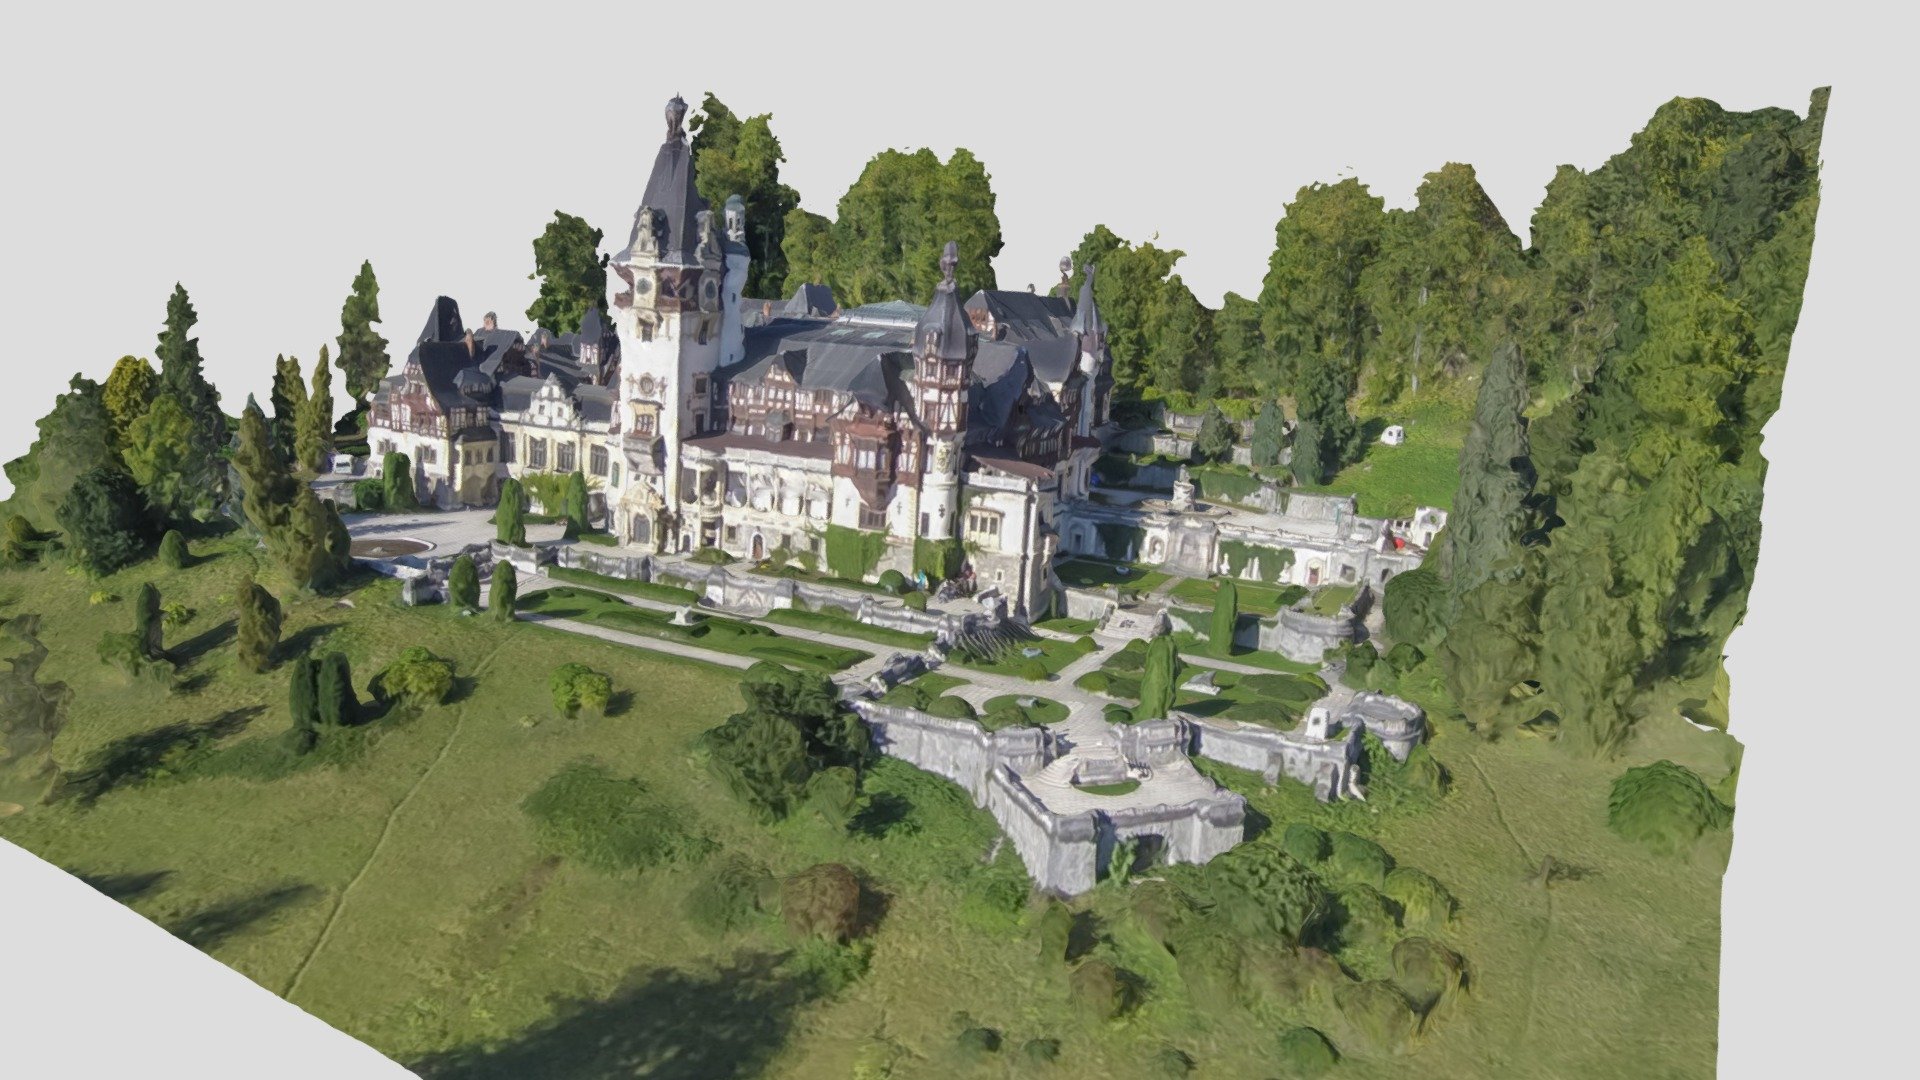 Model created from an old HD video shot in 2015. For a better model please for a quotation at office@fotografieaeriana.eu

Peleș Castle (Romanian: Castelul Peleș pronounced [kasˈtelul ˈpeleʃ] (About this soundlisten)) is a Neo-Renaissance castle in the Carpathian Mountains, near Sinaia, in Prahova County, Romania, on an existing medieval route linking Transylvania and Wallachia, built between 1873 and 1914. Its inauguration was held in 1883. It was constructed for King Carol I 3d model